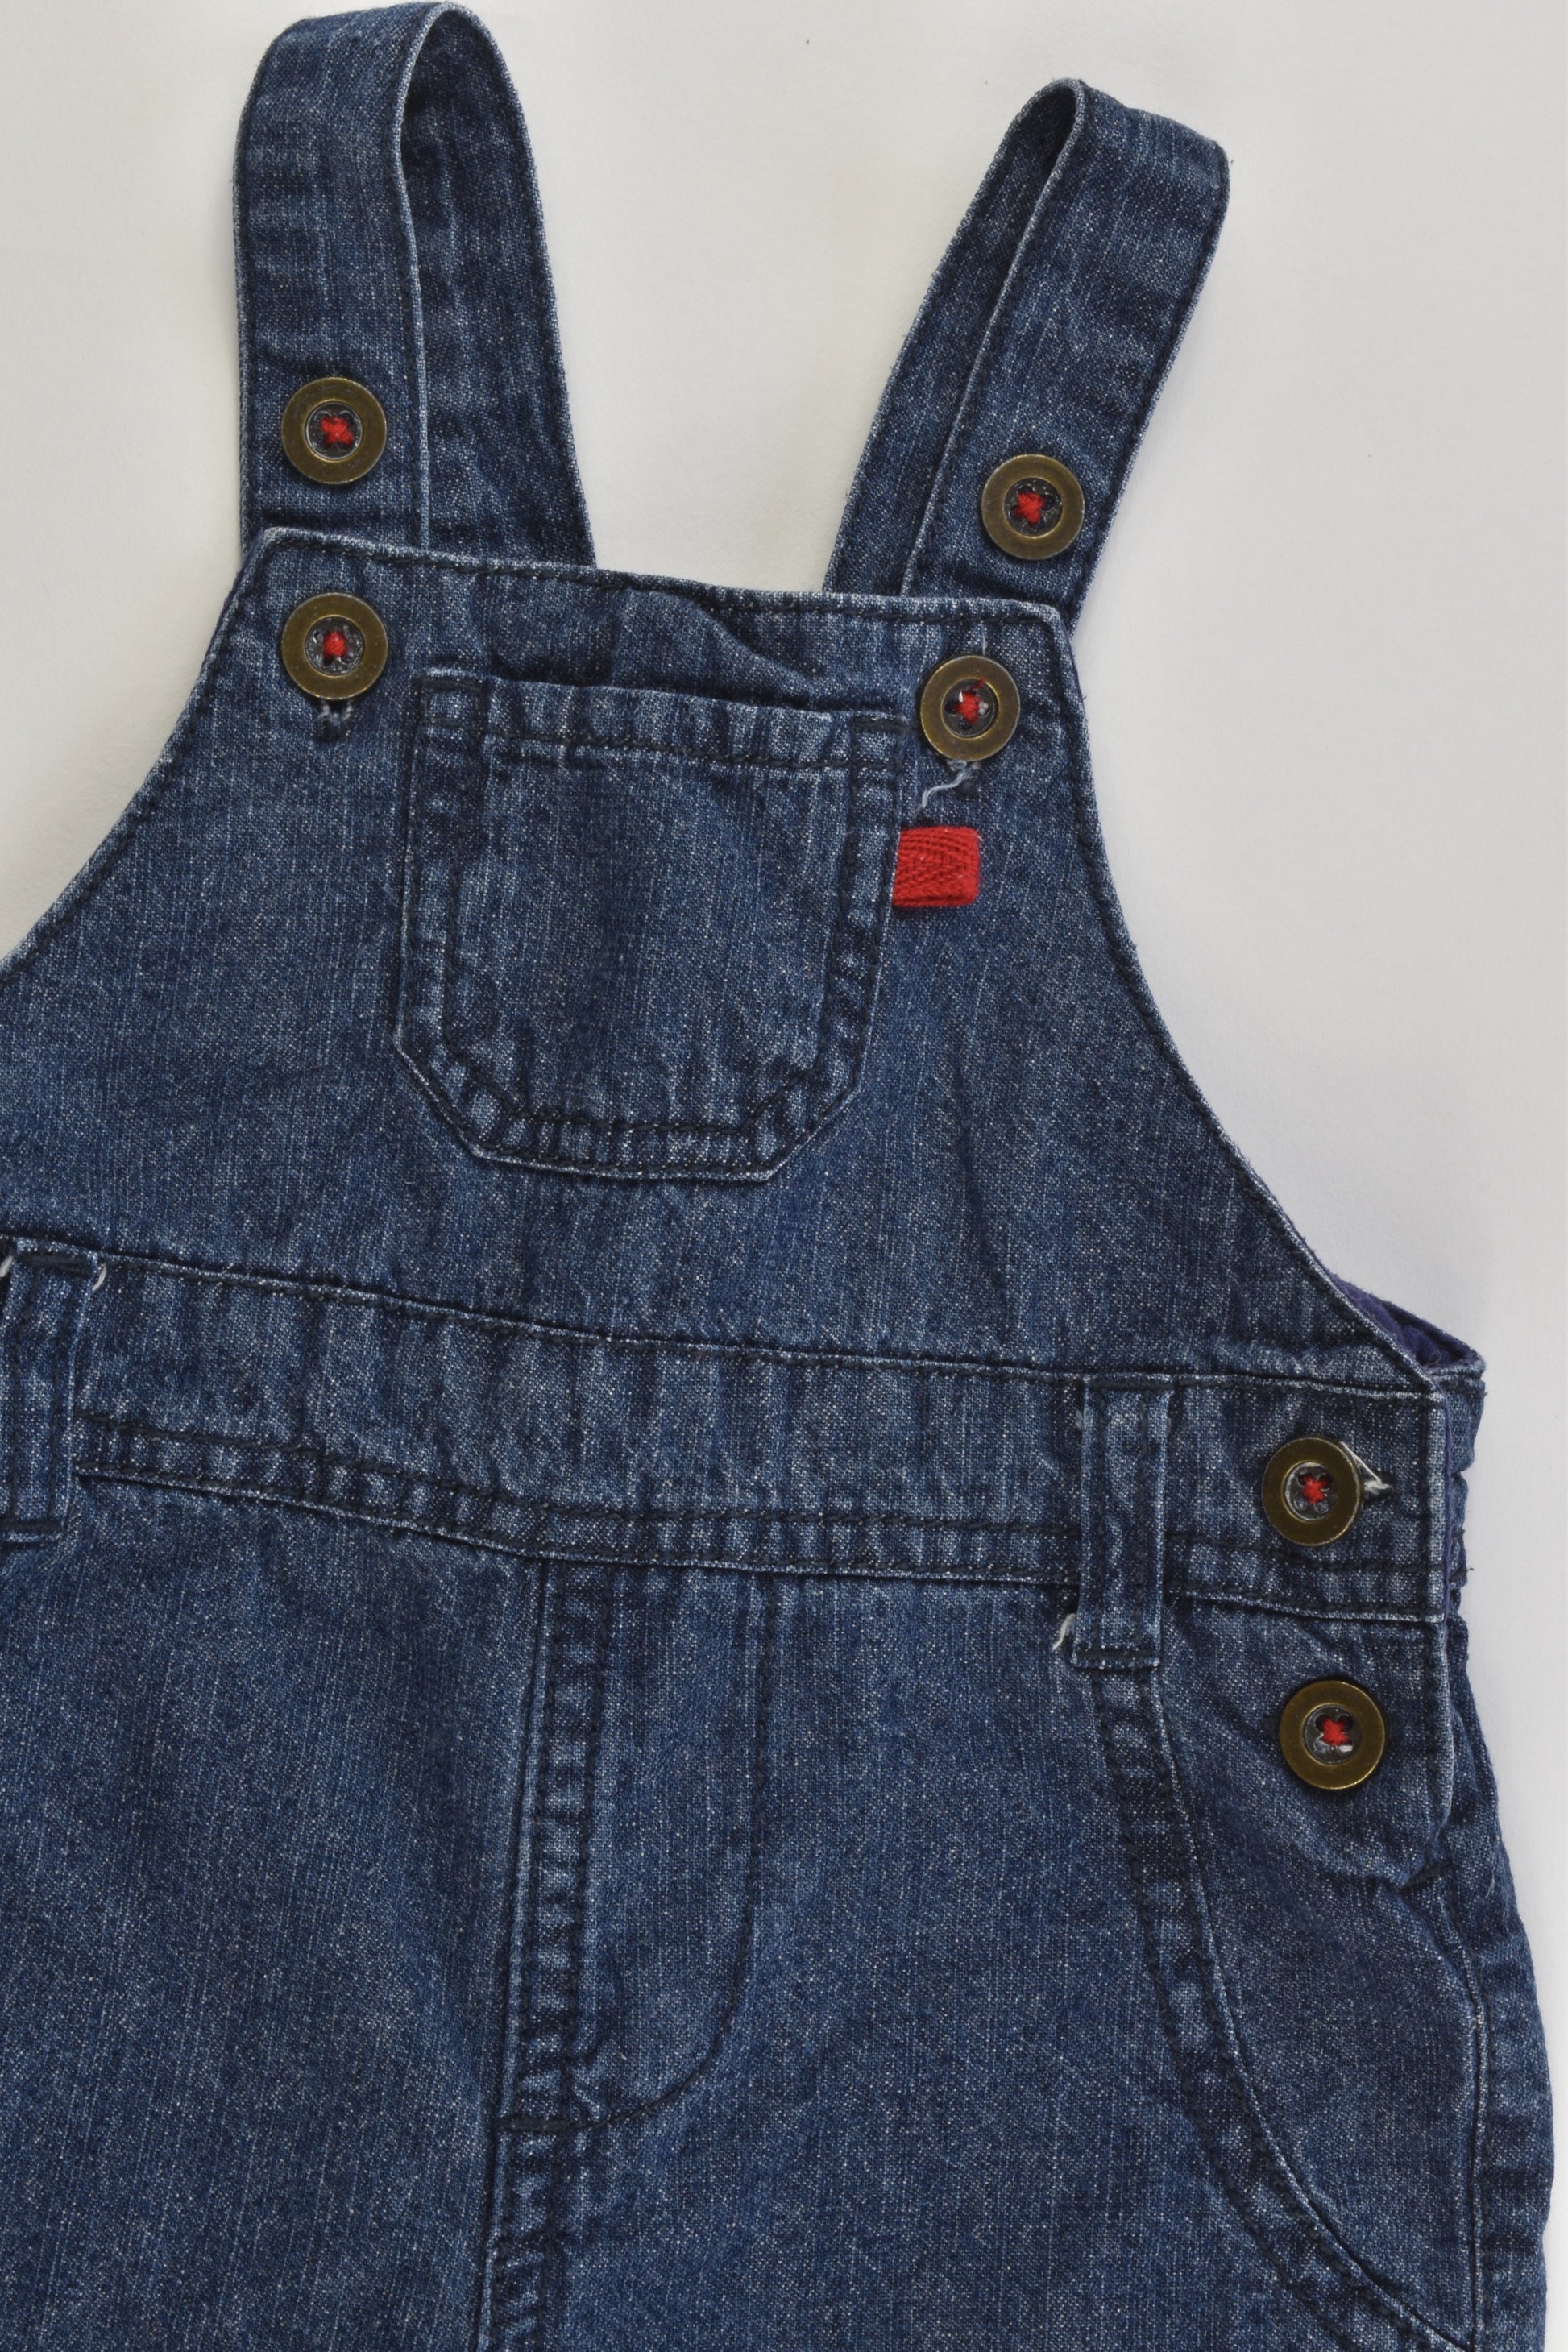 Baby Berry Size 00 (3-6 months) Lined Denim Overalls